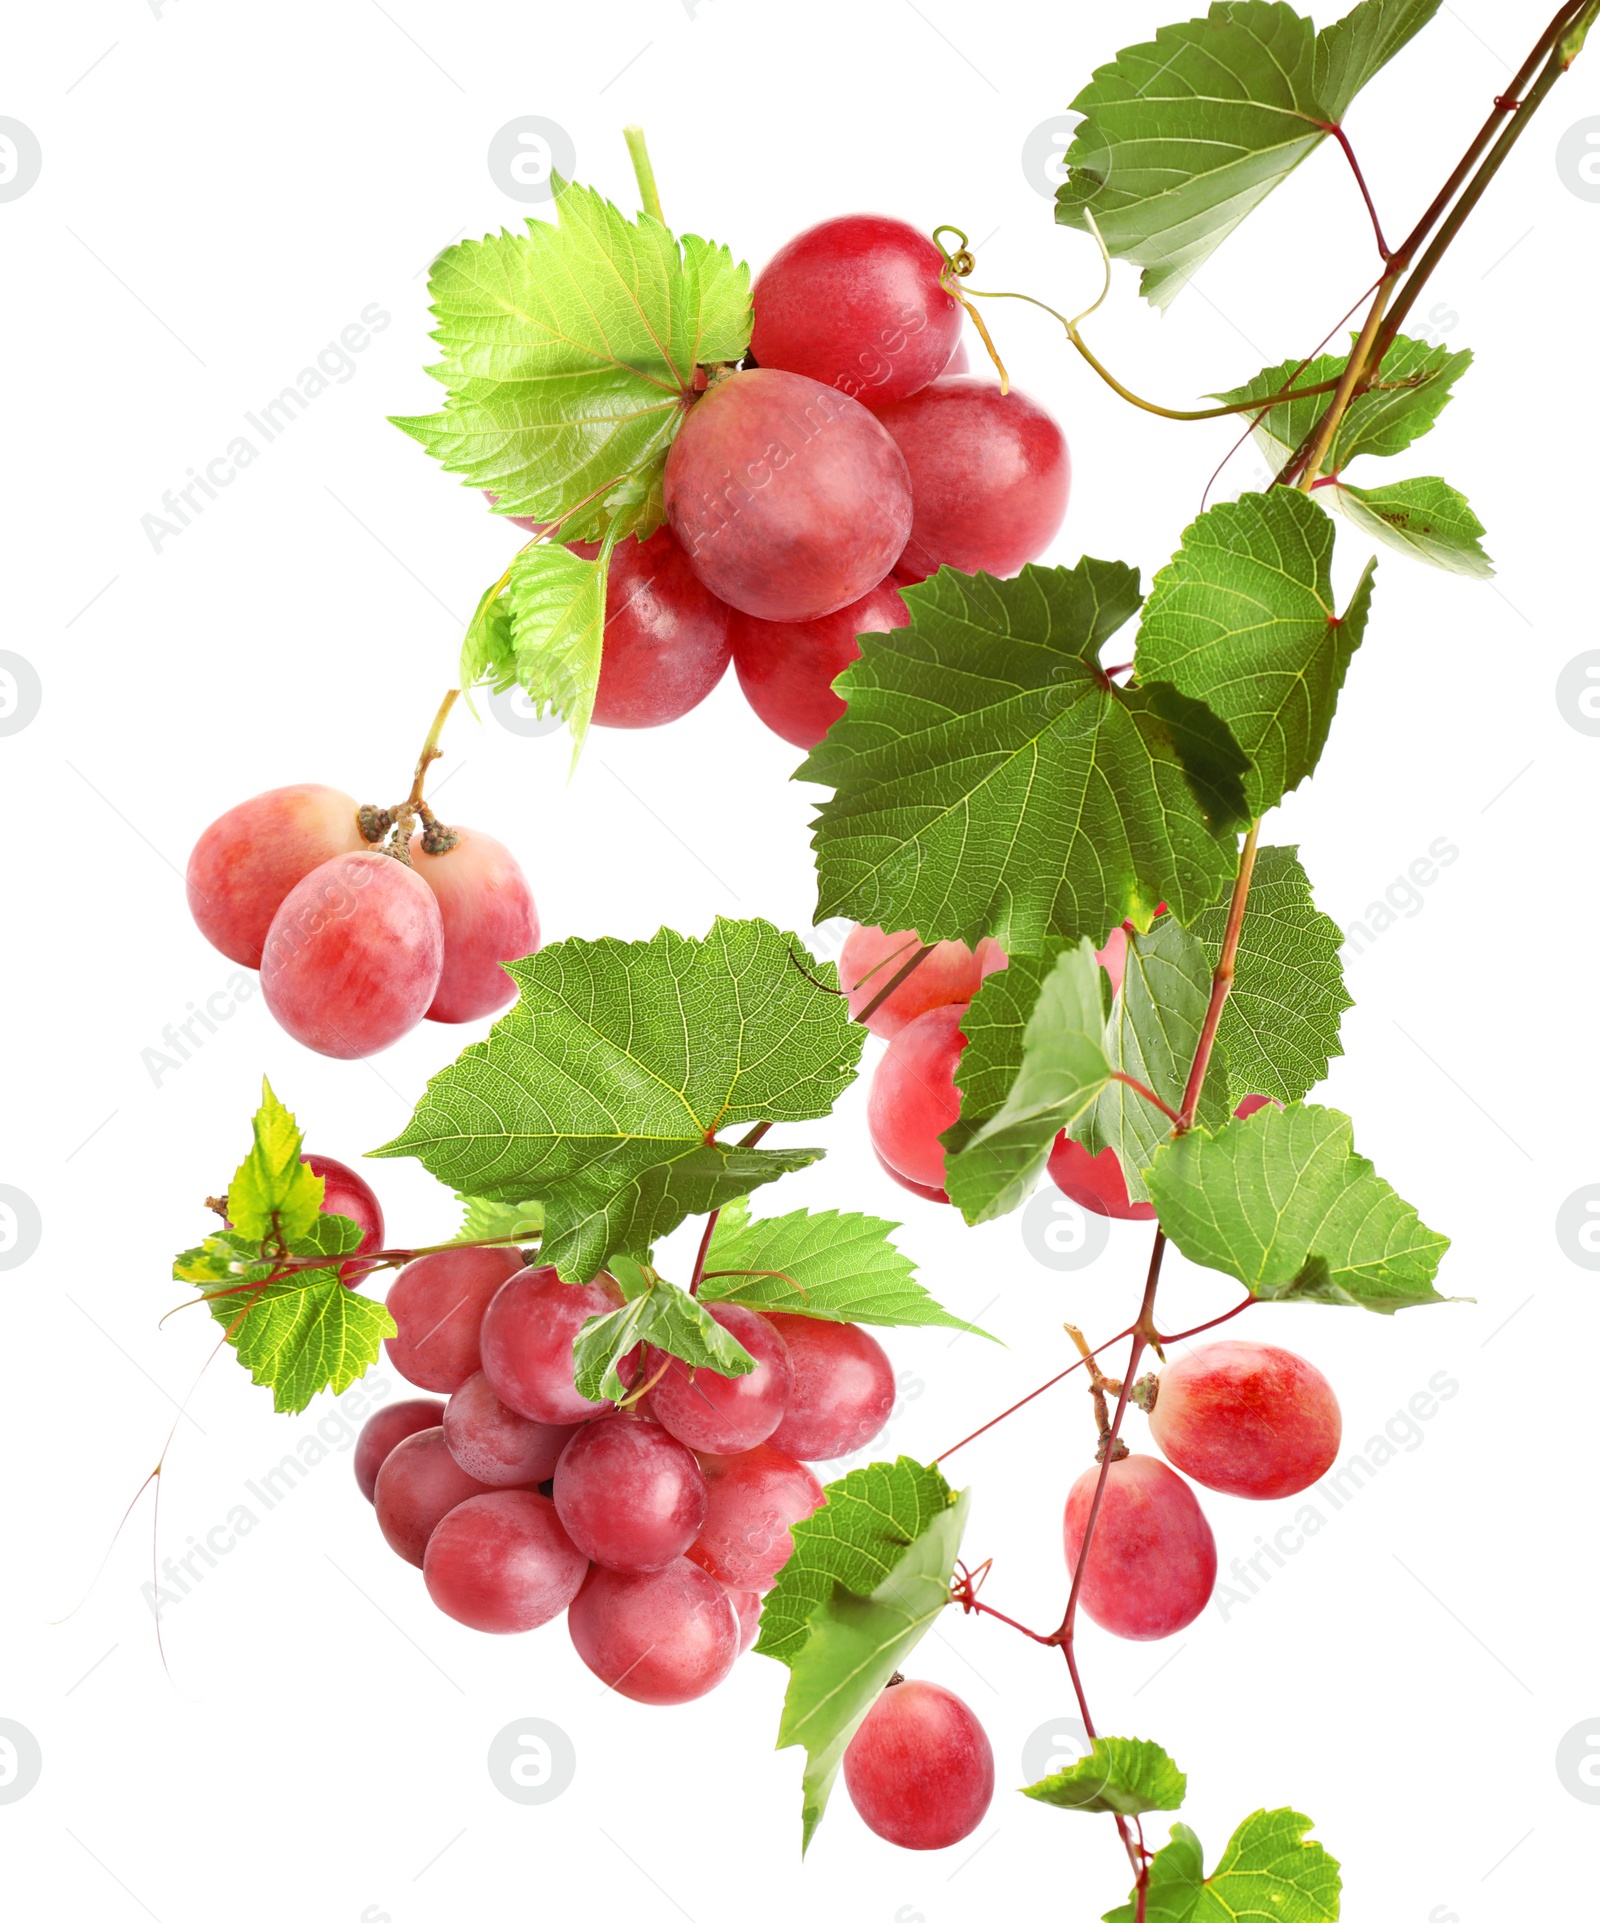 Image of Fresh ripe grapes with green leaves falling on white background